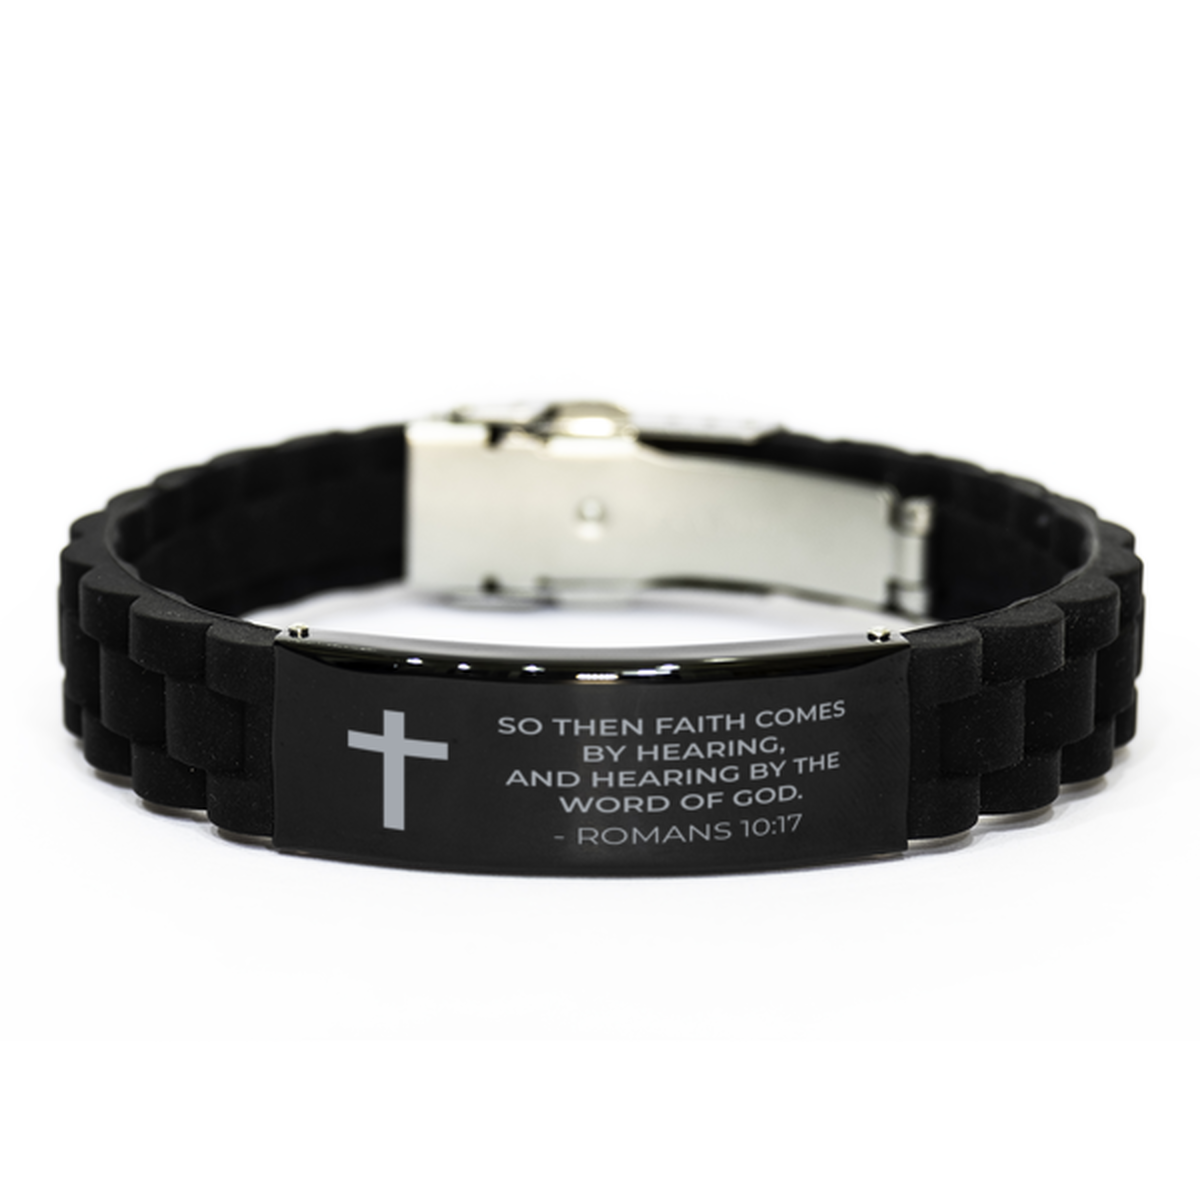 Bible Verse Black Bracelet,, Romans 10:17 So Then Faith Comes By Hearing, And Hearing By, Inspirational Christian Gifts For Men Women